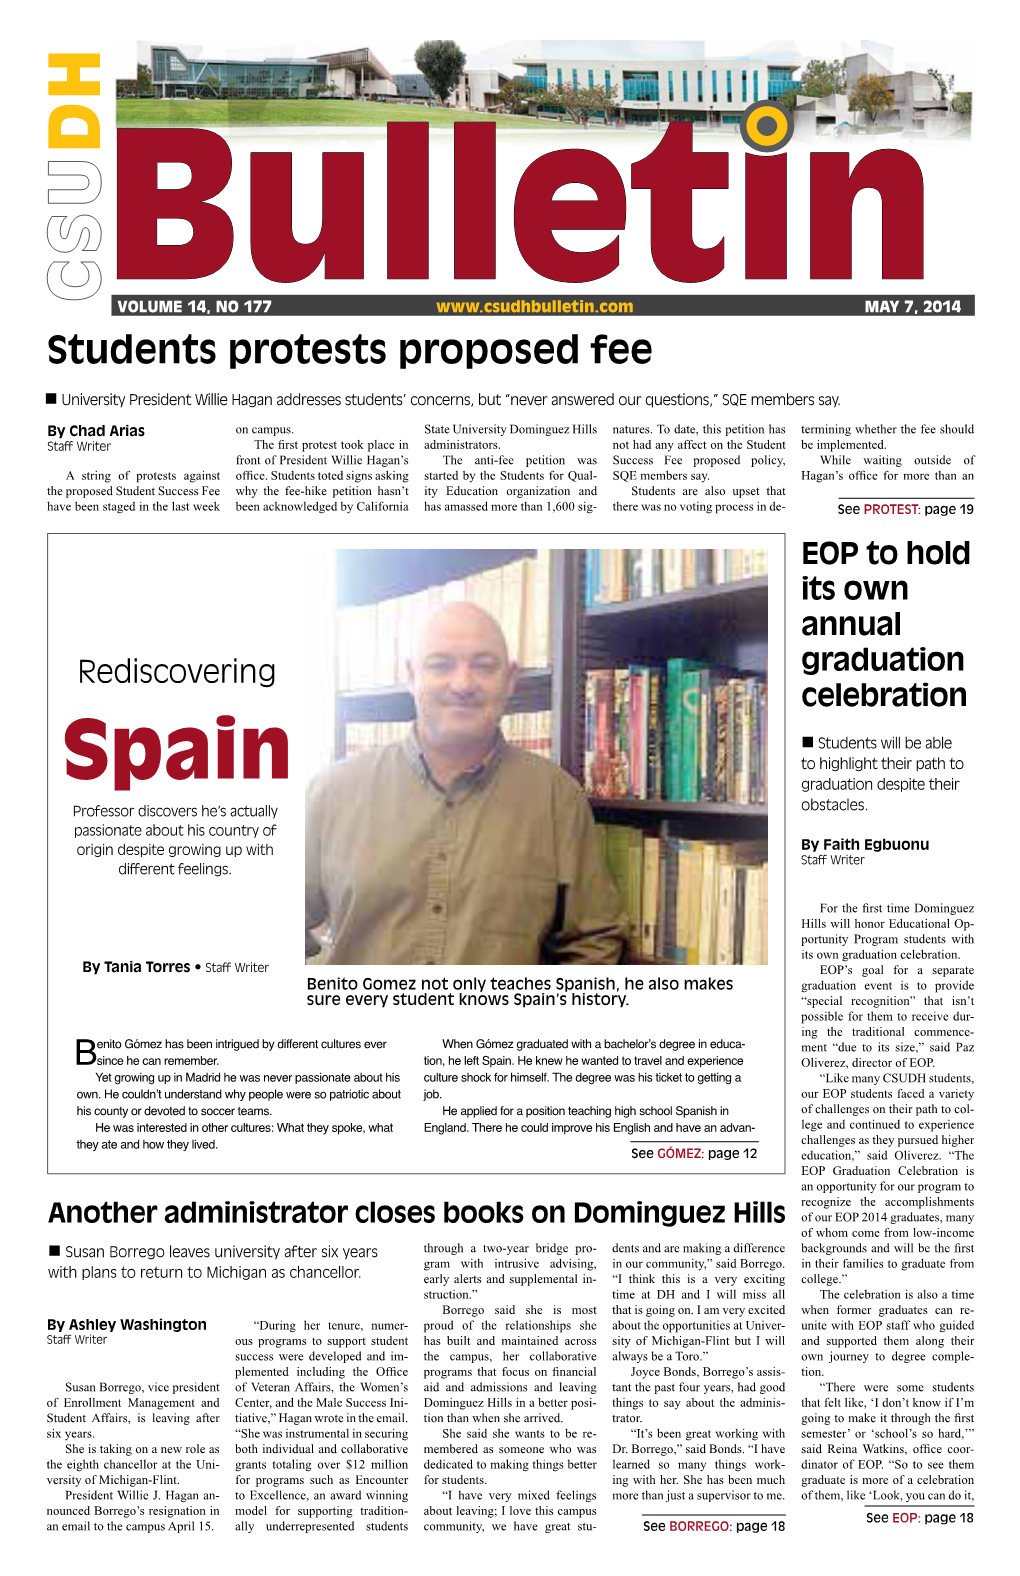 Students Protests Proposed Fee